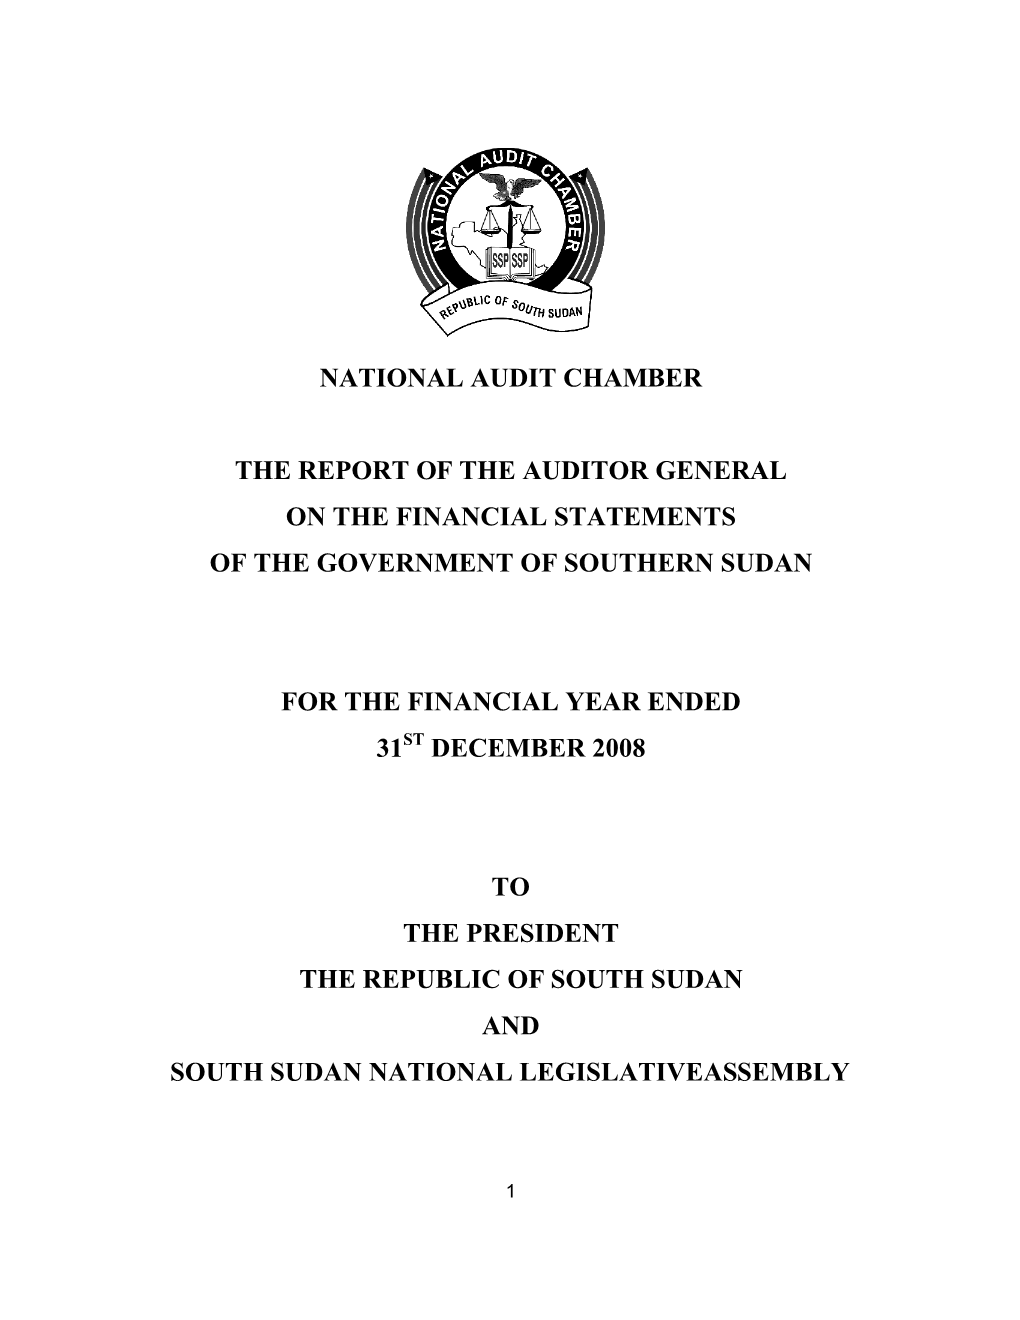 National Audit Chamber the Report of the Auditor